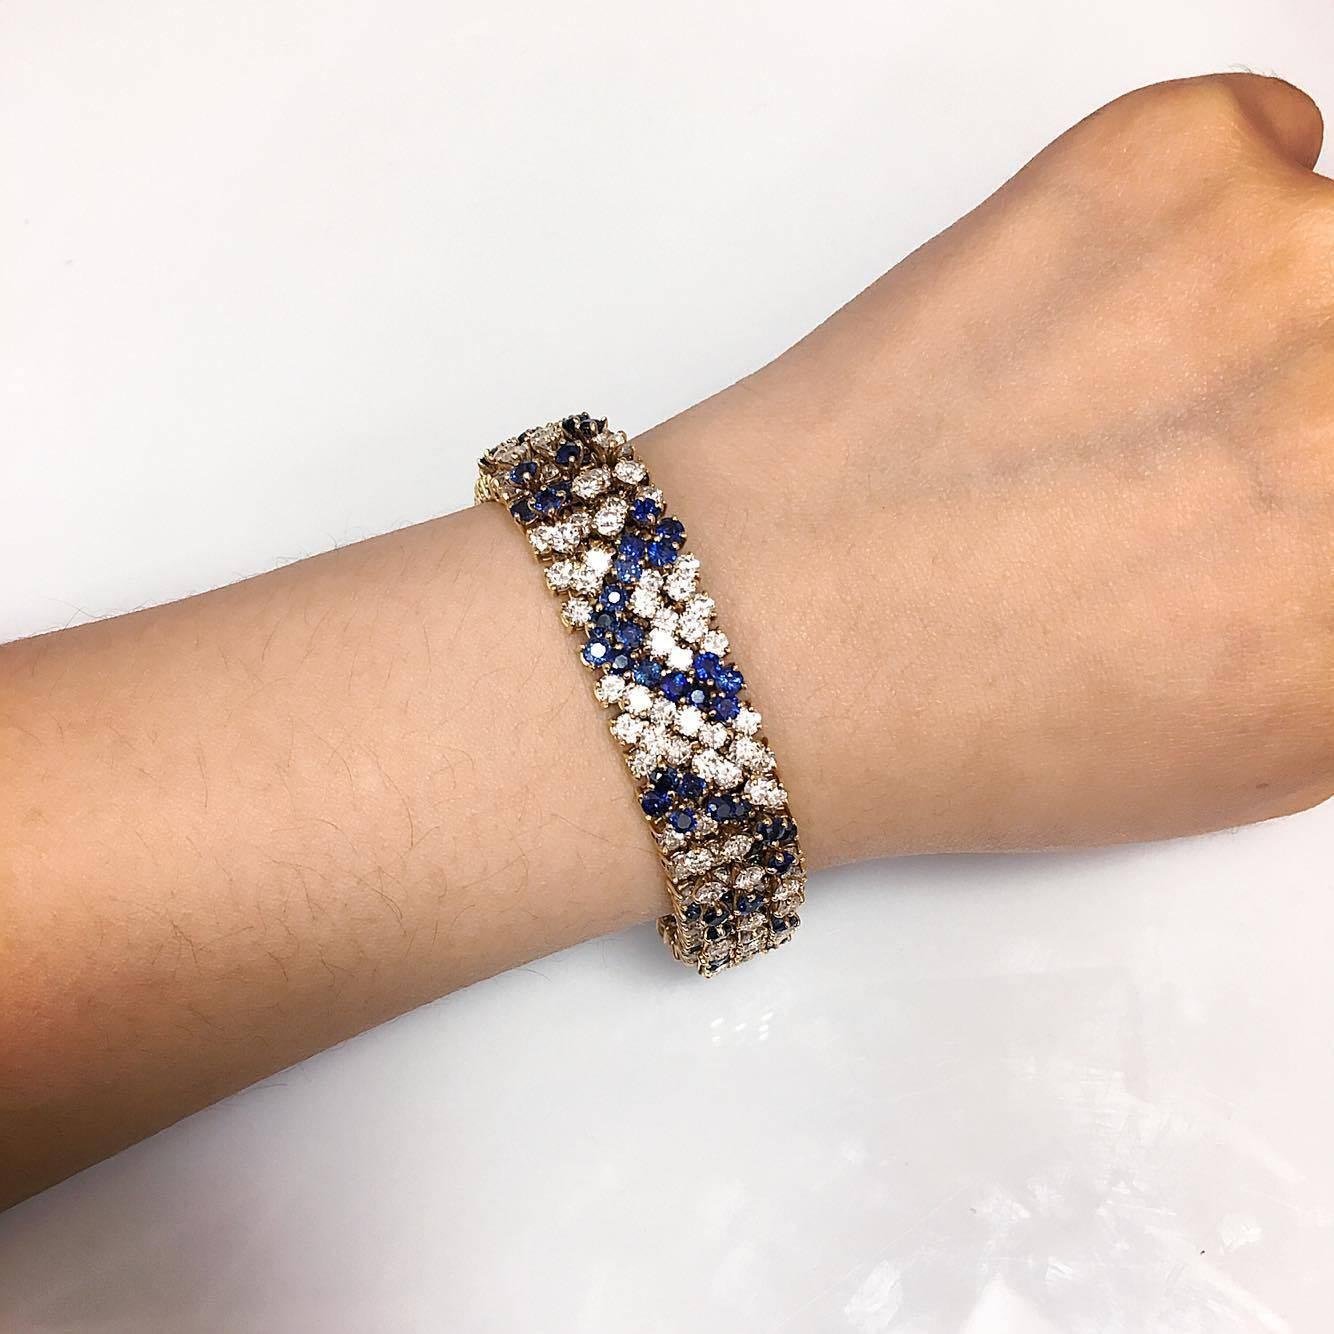 This one of a kind bracelet (matching necklace also available on 1stdibs) features approximately:
17.00cts white diamonds  E color Vvs1 Clarity 
18.00cts rich blue sapphire 
Length: 7.00 inches and can be lengthened or shortened

All Emilio! pieces